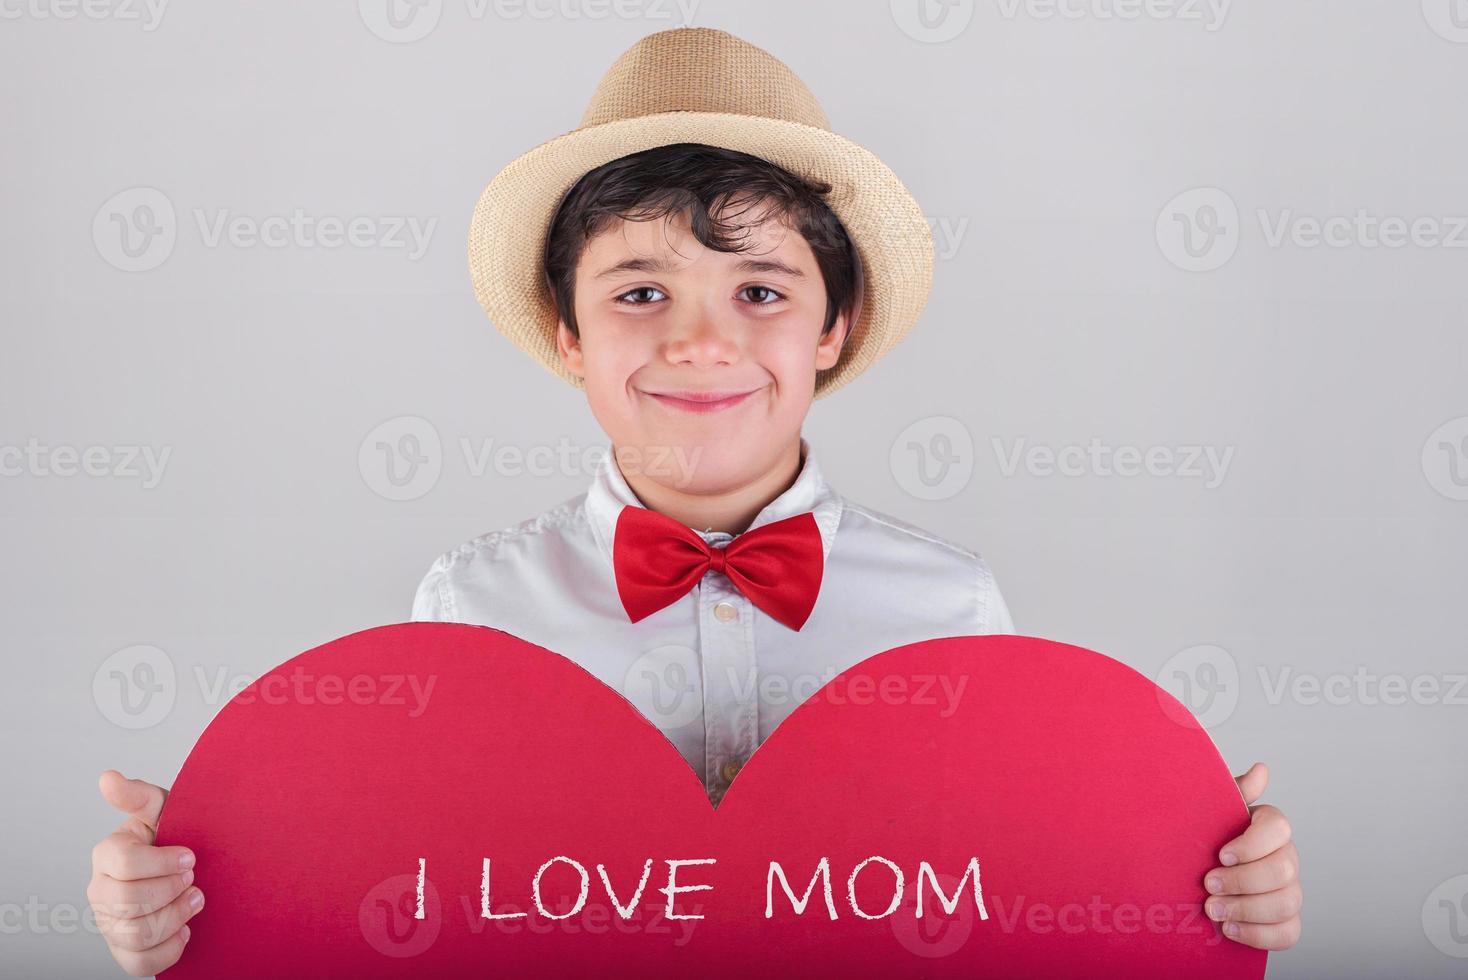 I love mom, happy child with a red heart photo